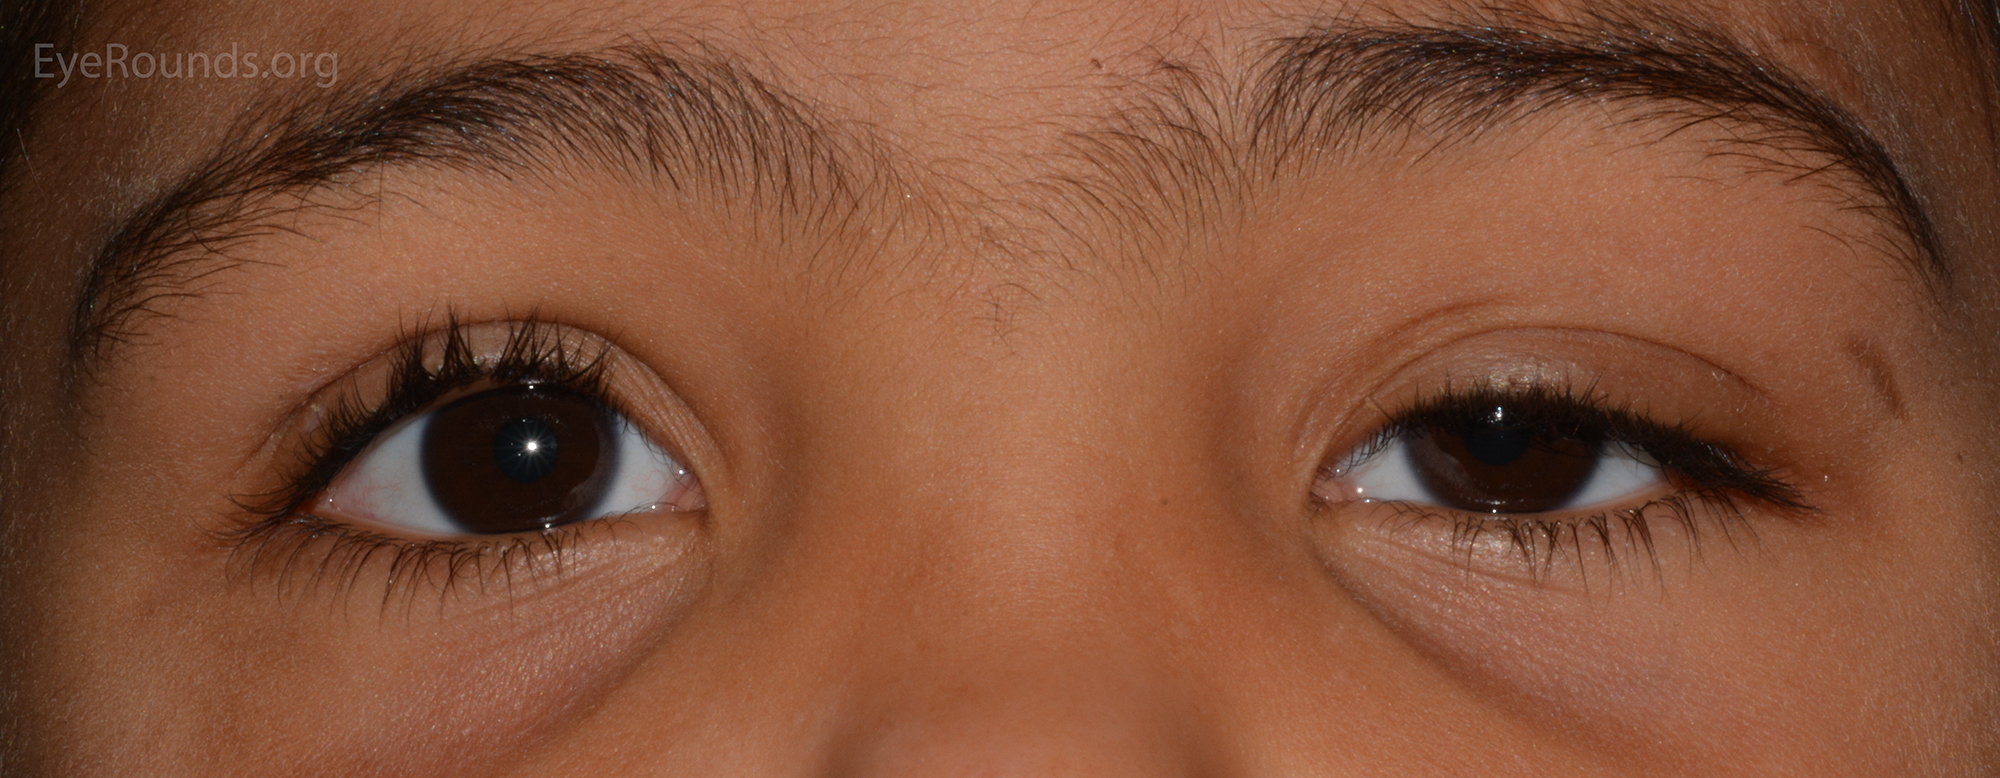 Pseudoptosis in left eye of a child with monocular elevation deficiency